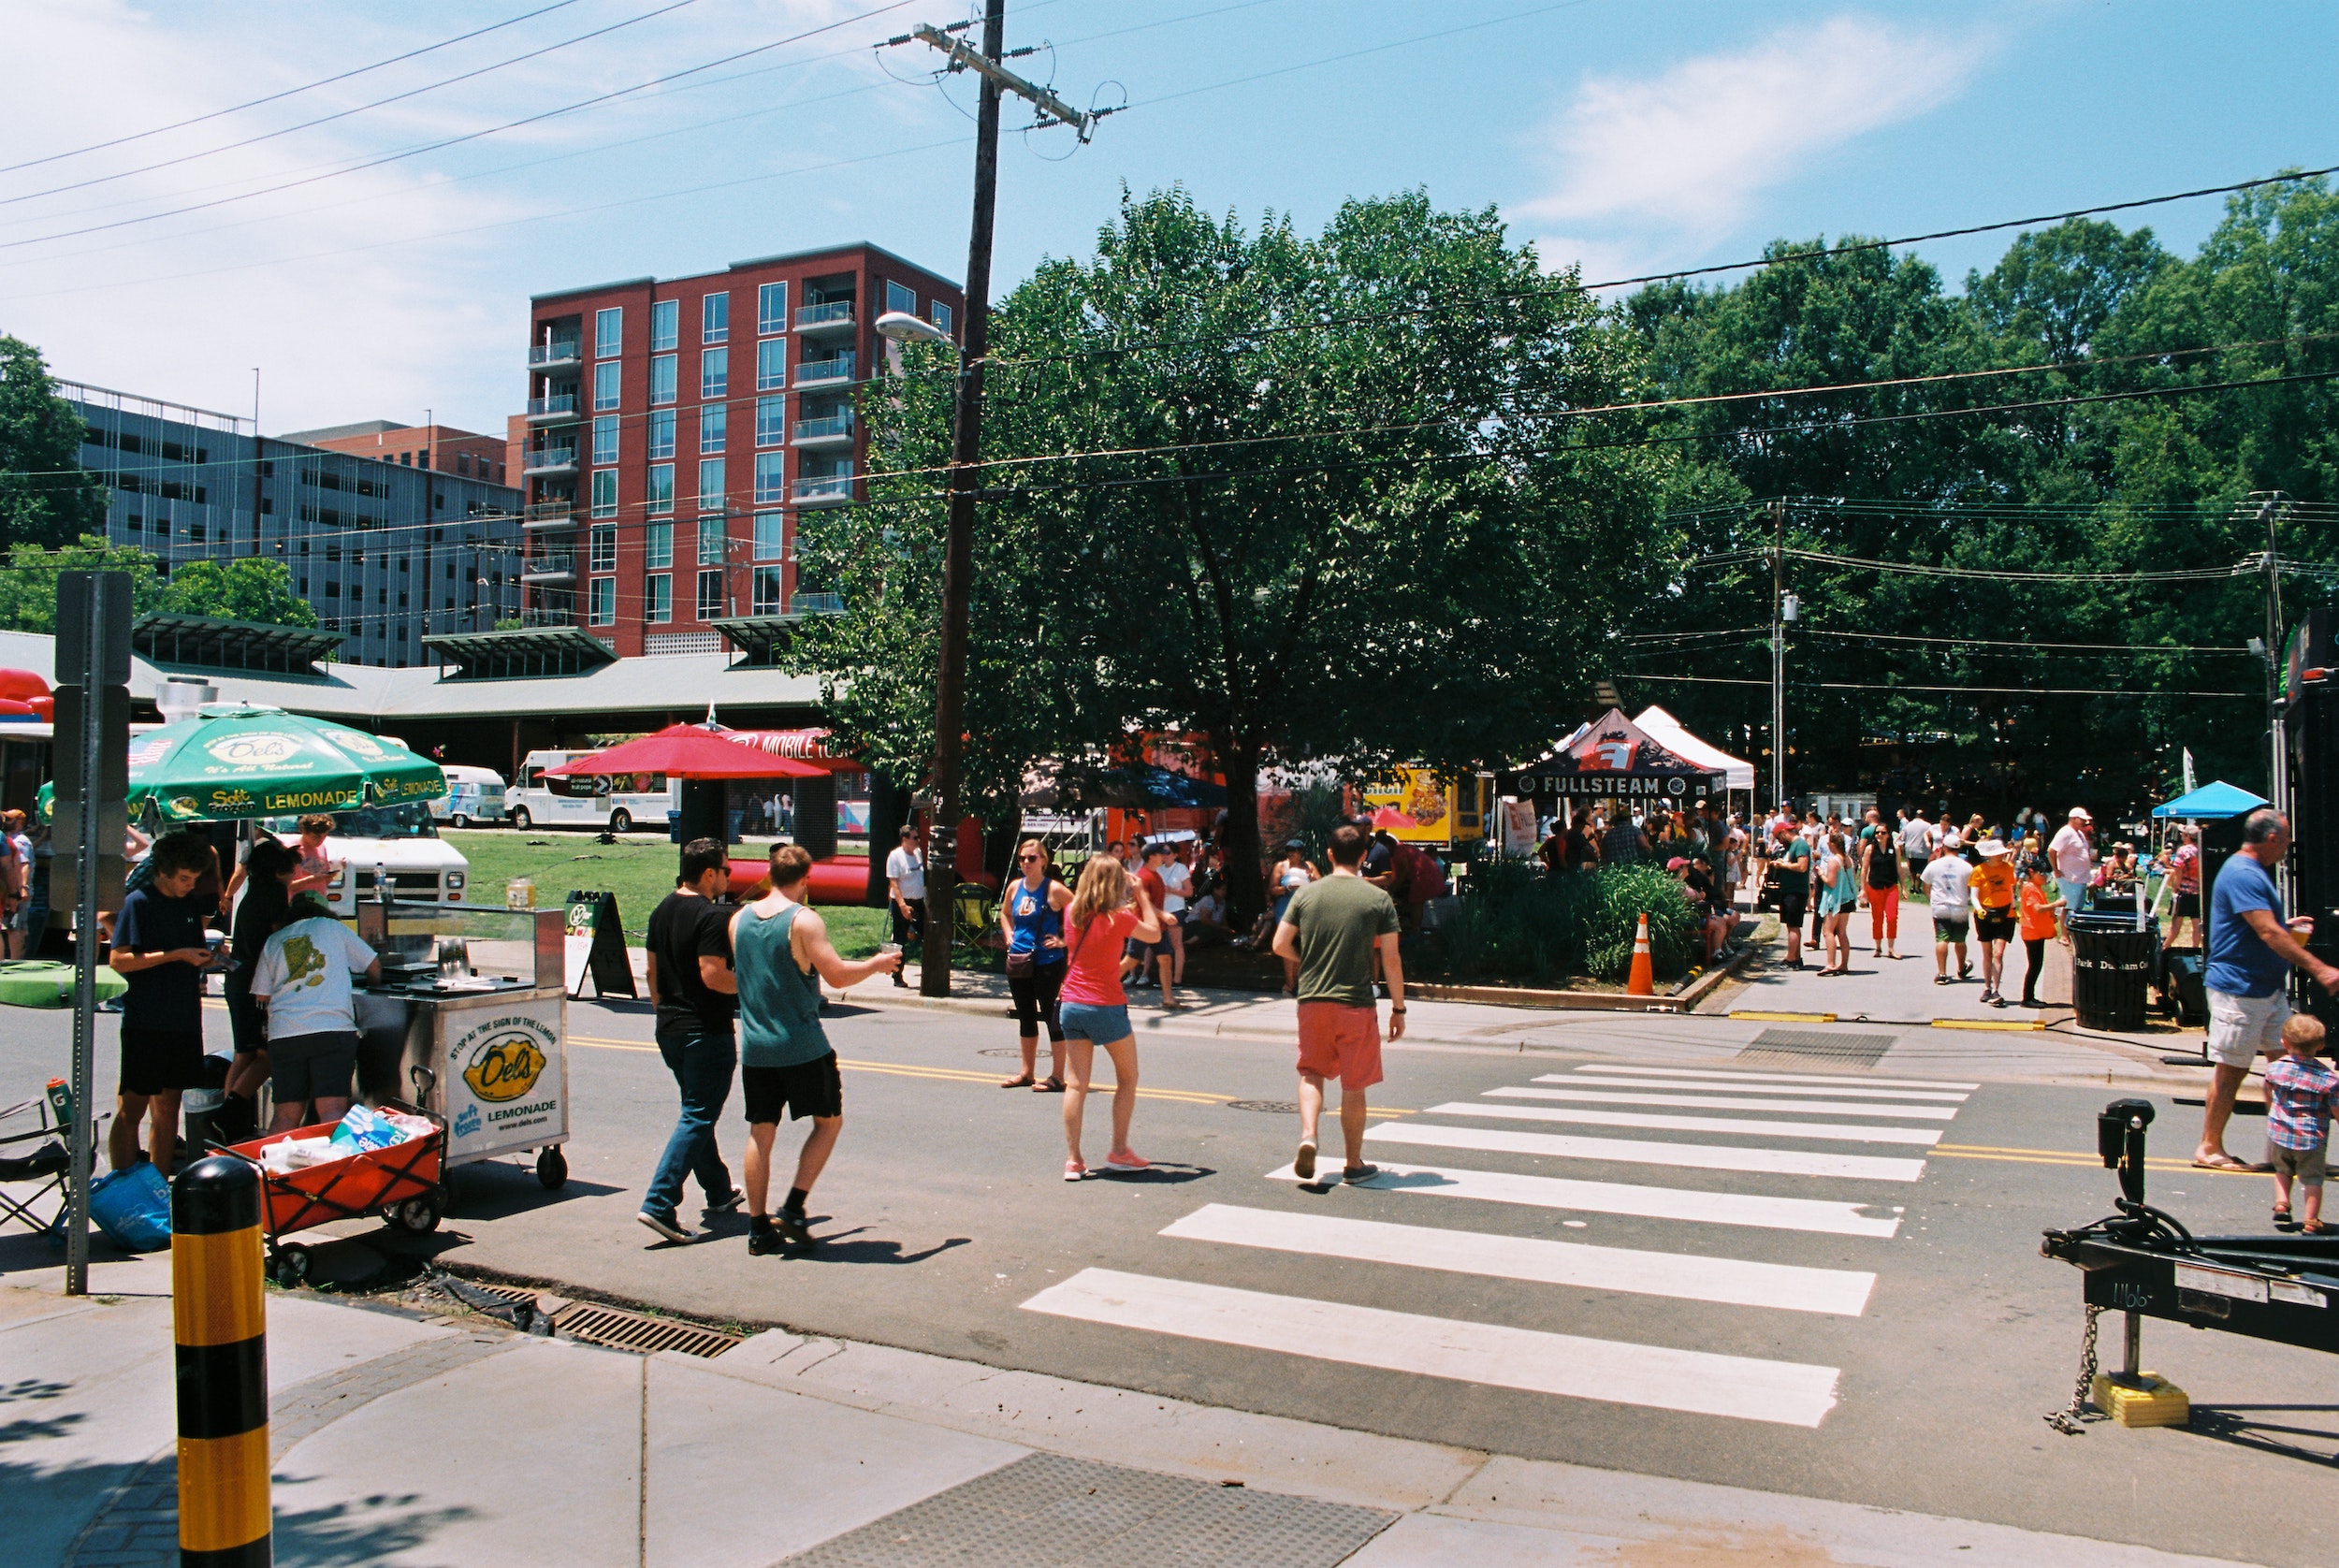 Sunny day in downtown Durham with residents and visitors visiting food and craft stands lining the streets.